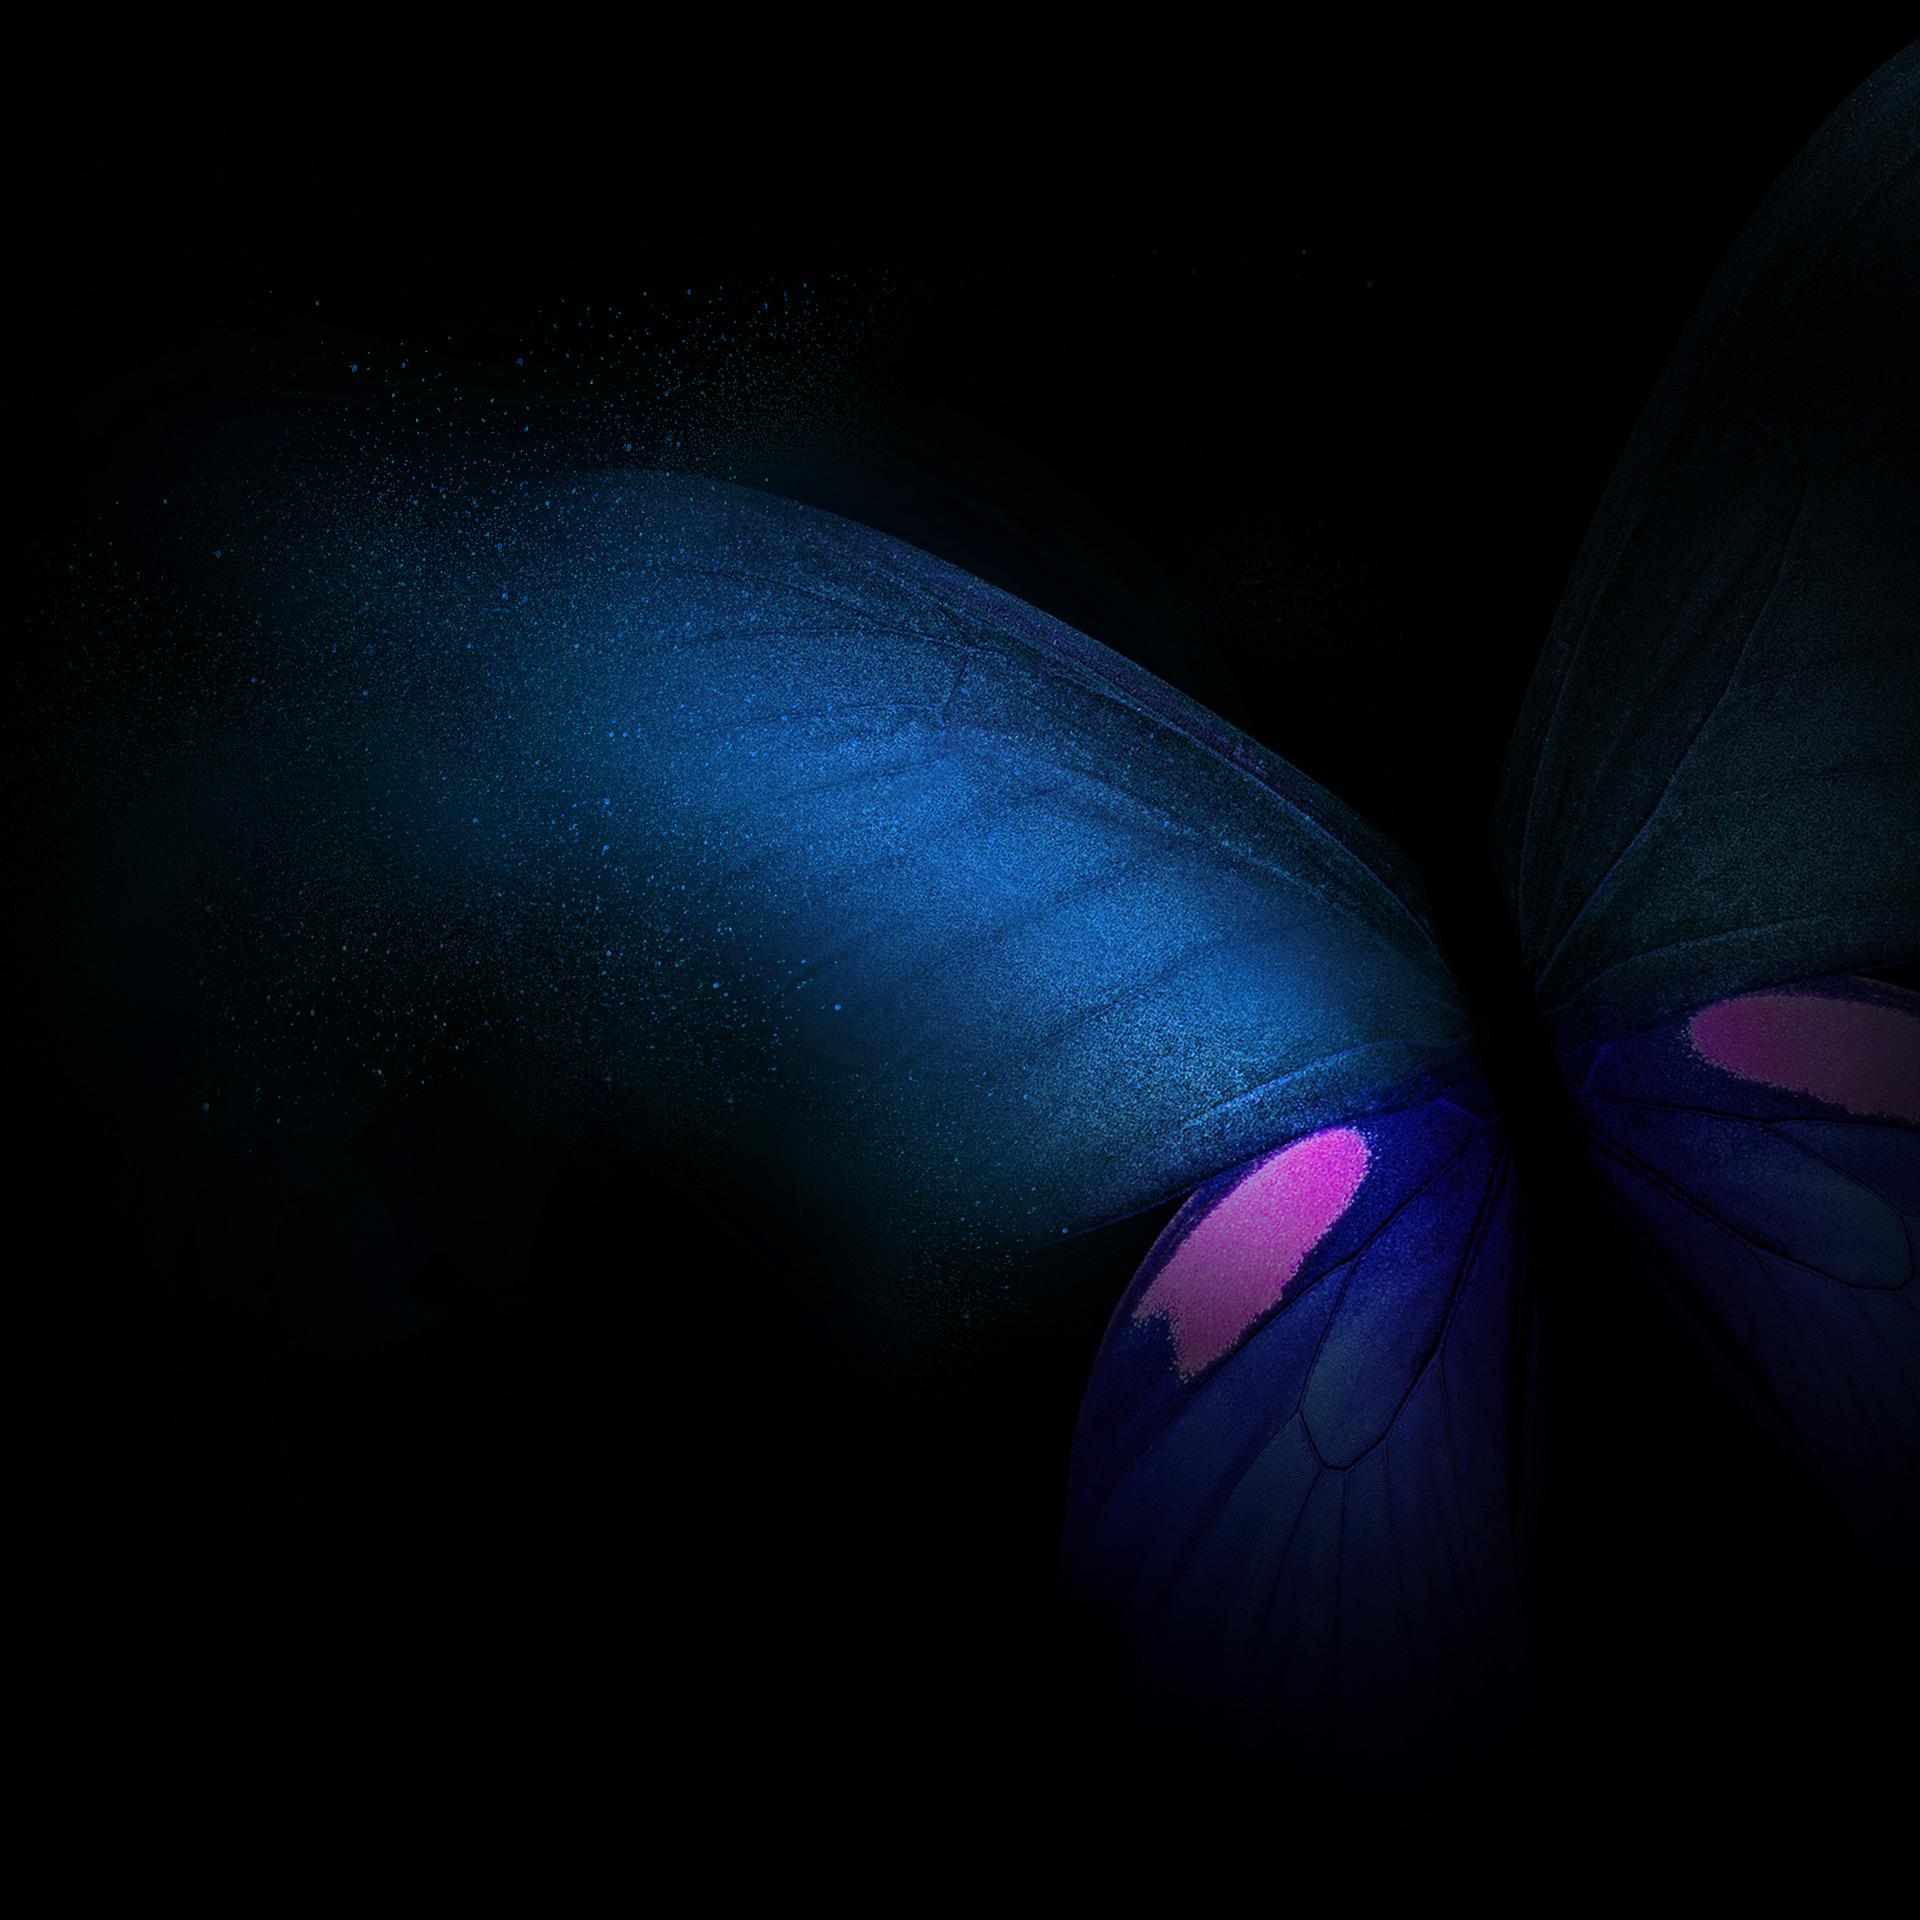 Download Samsung Galaxy Fold wallpaper in full resolution right here